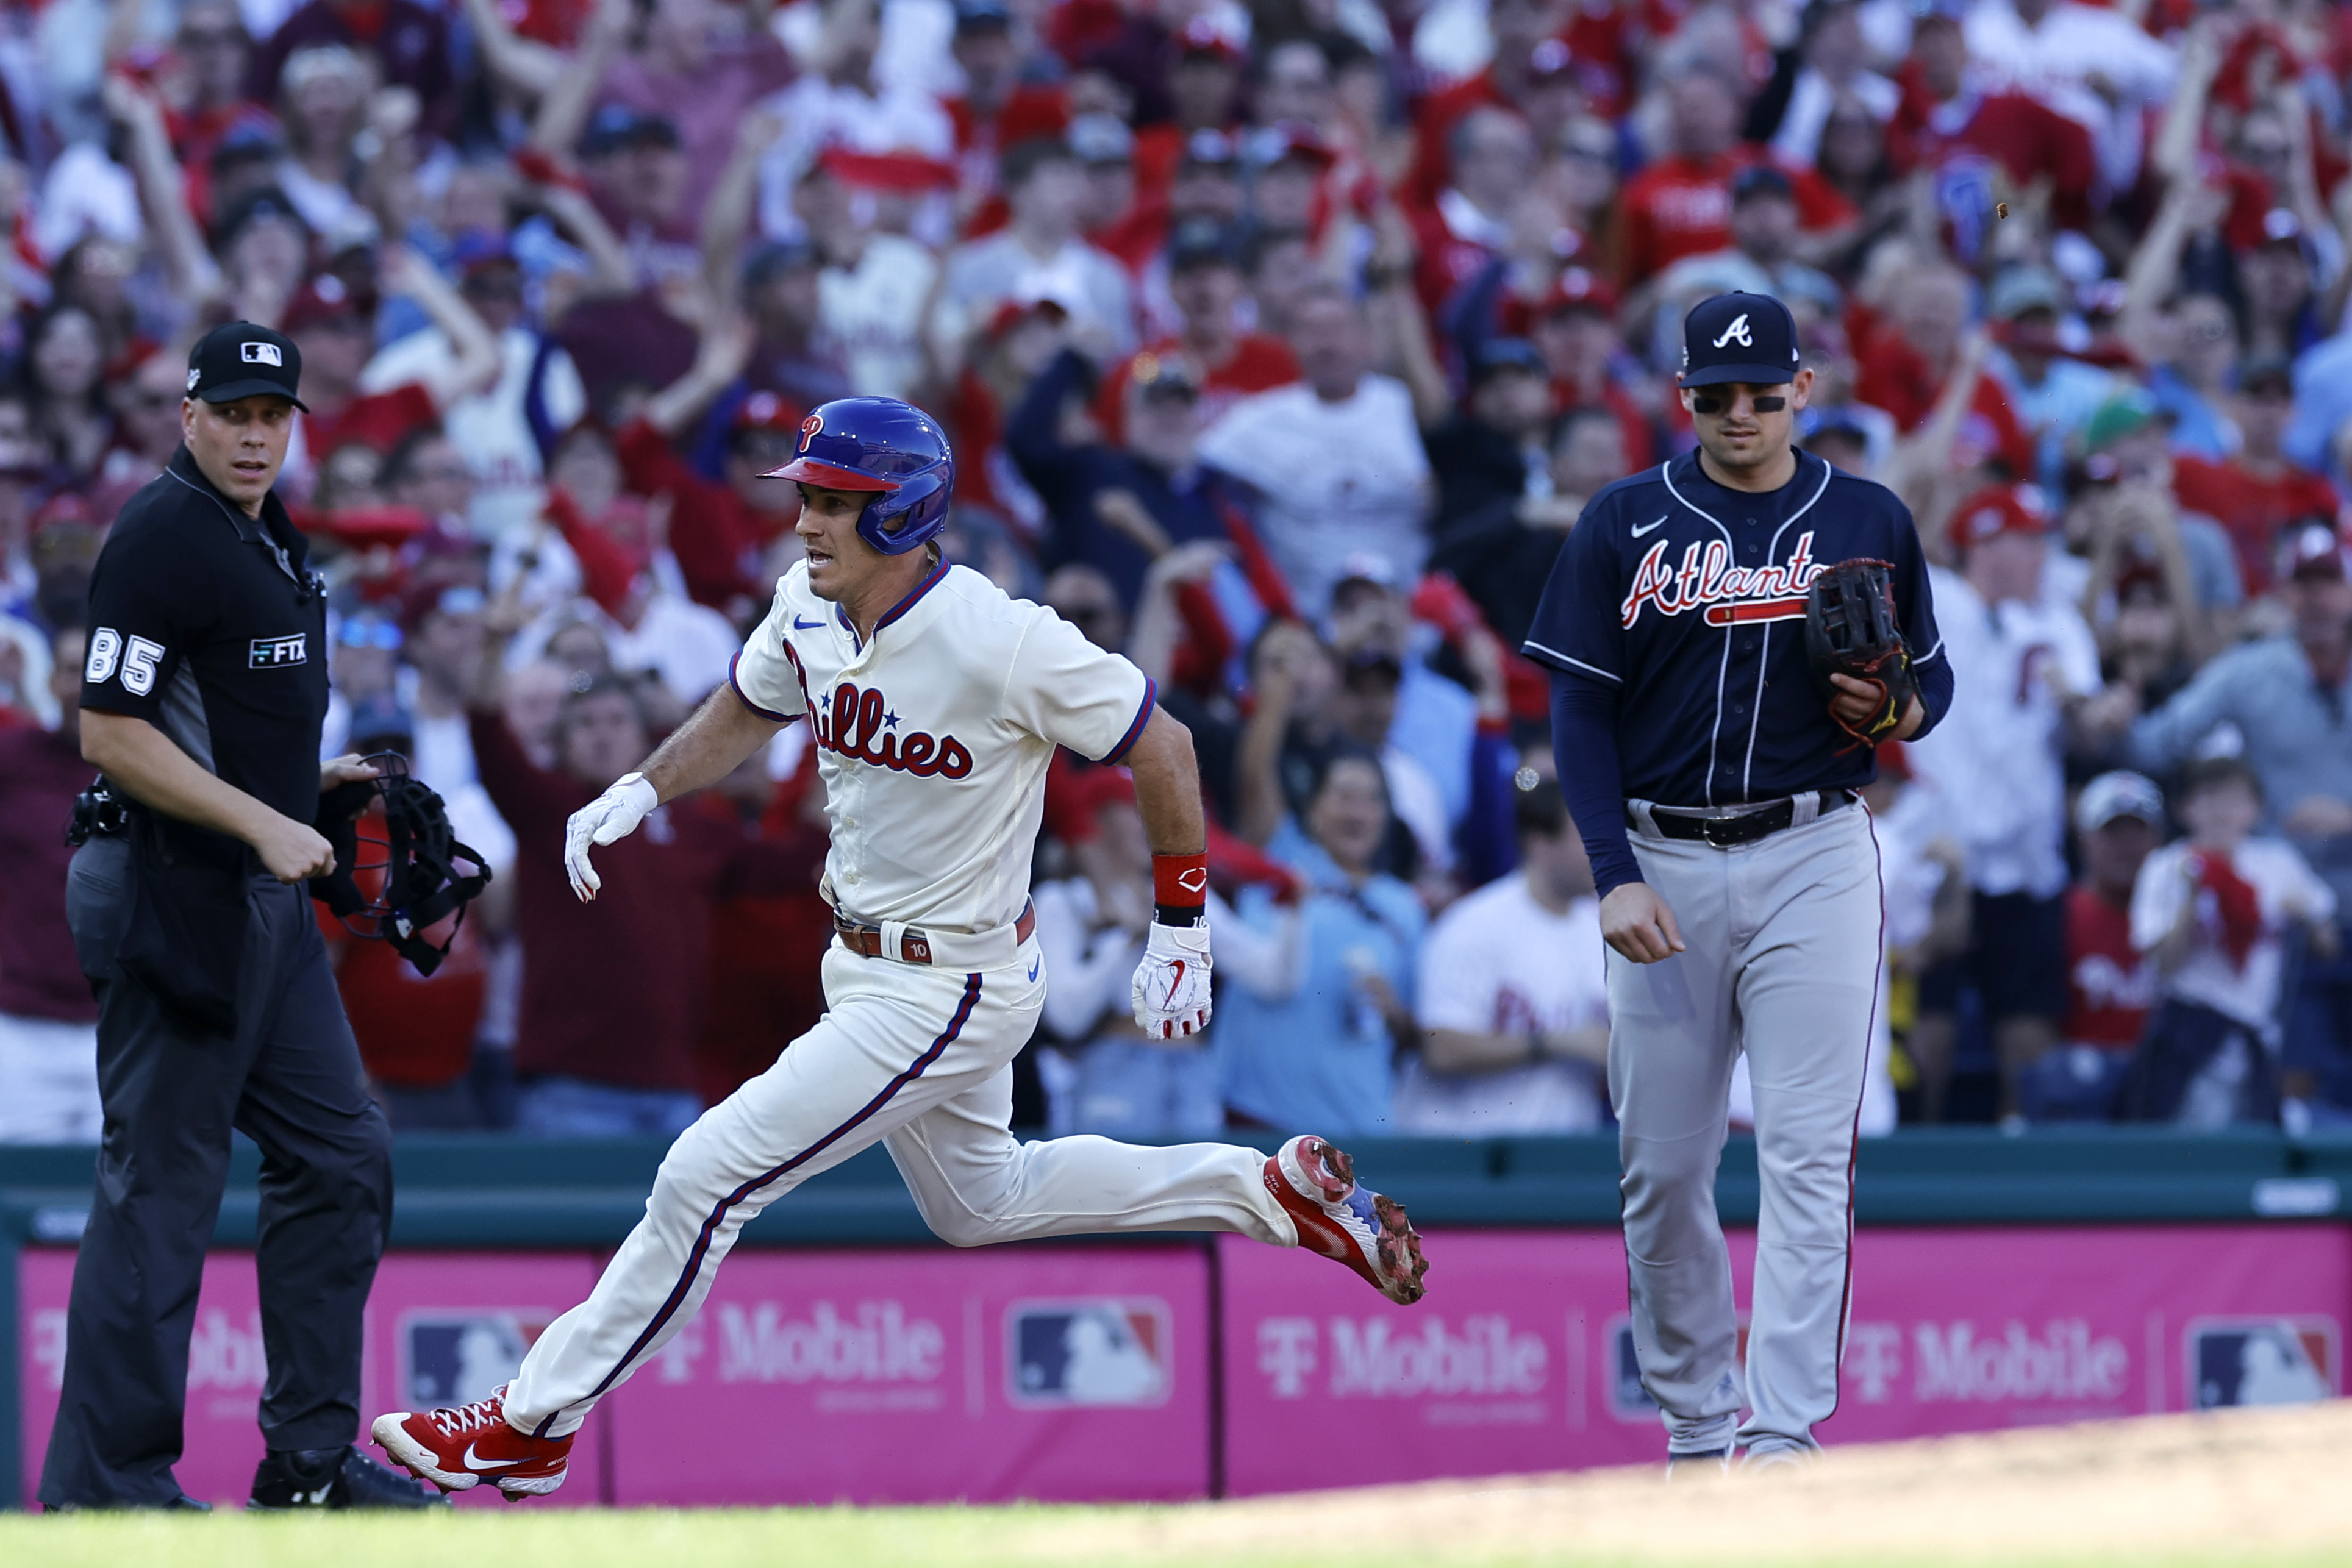 J.T. Realmuto helps Phillies reach NLCS with Christ at the center